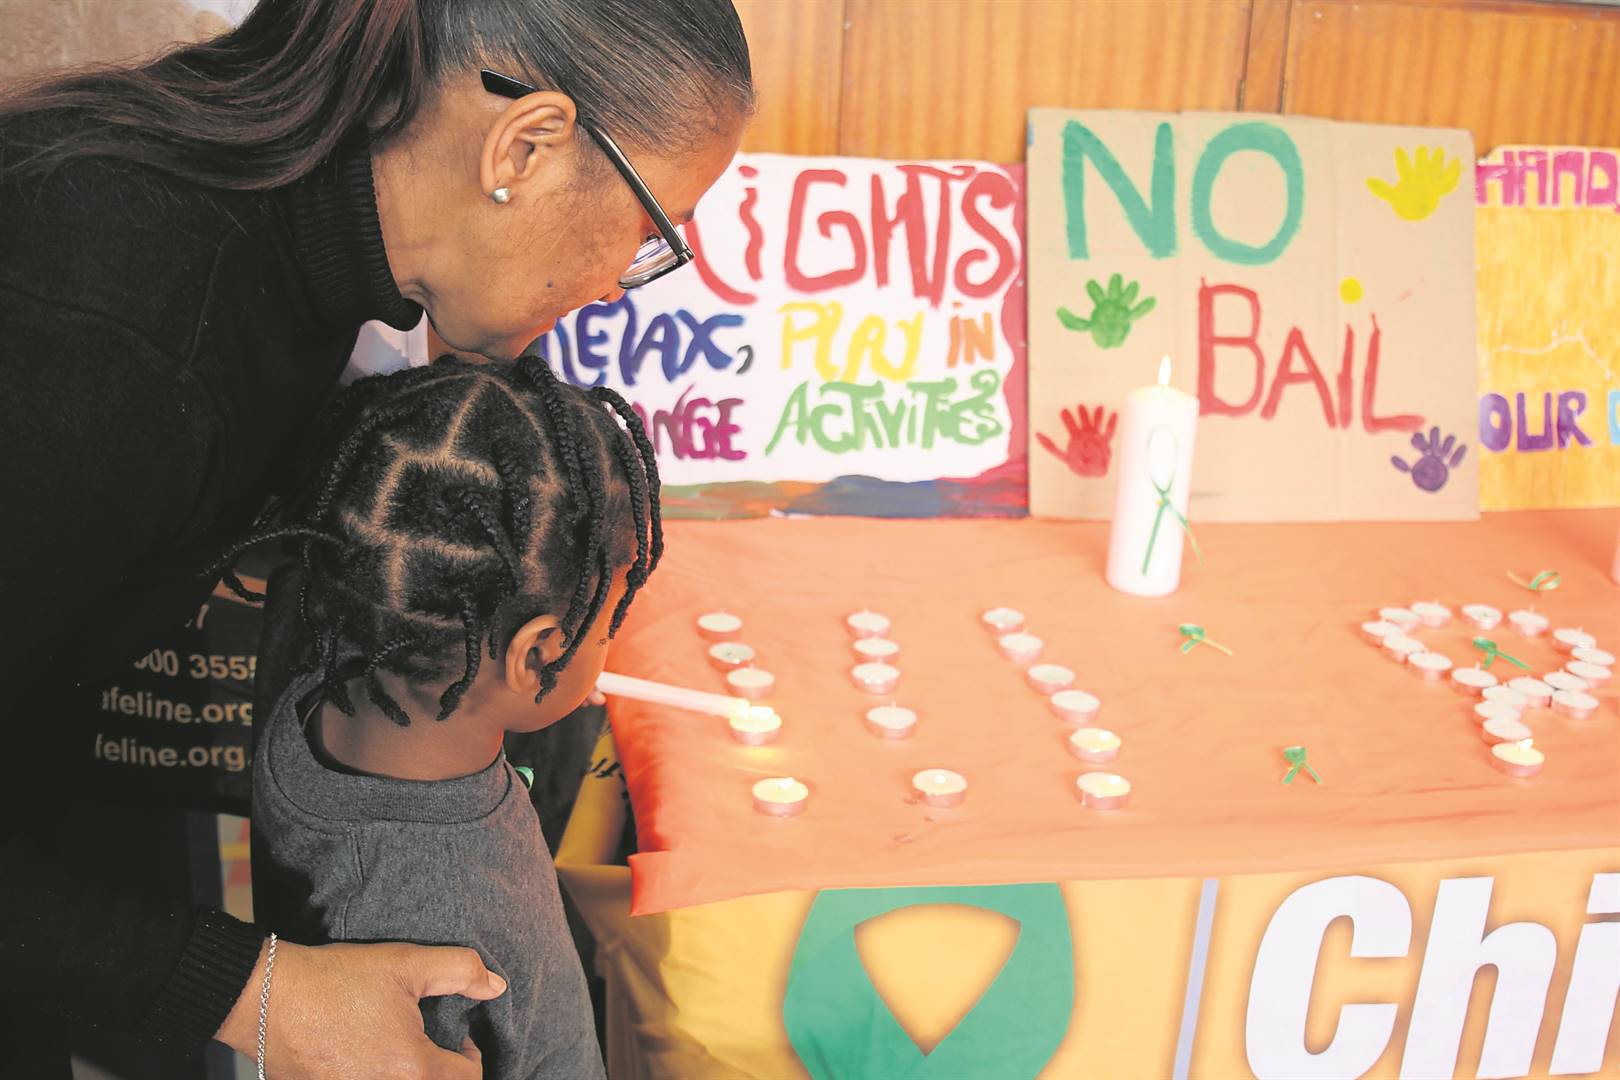 Safeline hosted a range of events in commemoration of Child Protection week which included a candle ceremony for victims of abuse.PHOTO: Samantha Lee-Jacobs